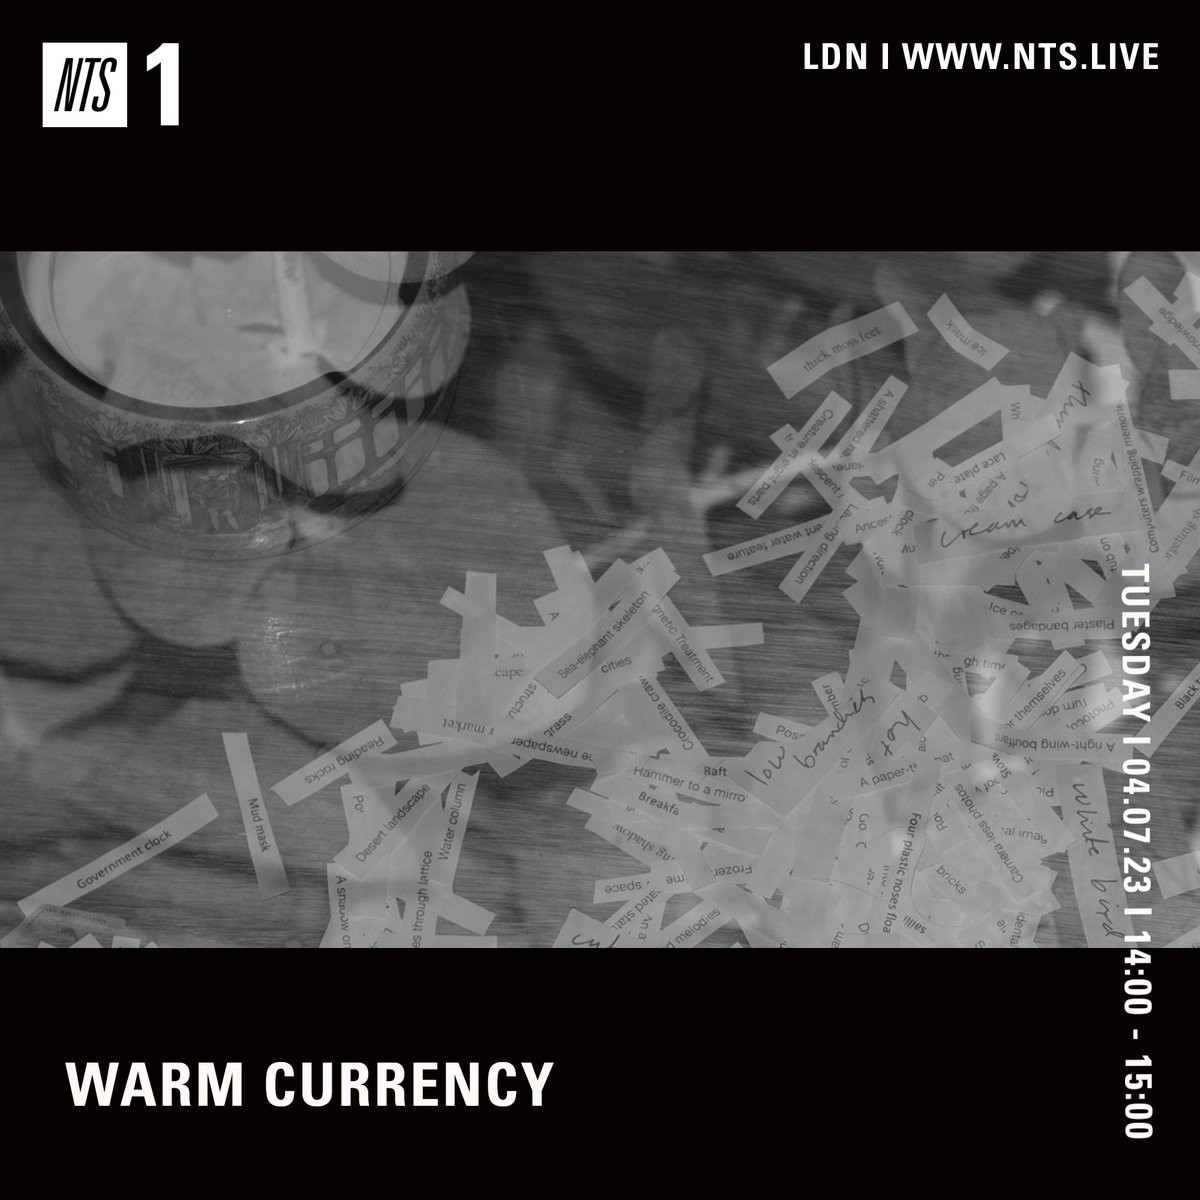 So nice to have Warm Curreny filling in for me today on @NTSlive. Tune in to hear some lovely sounds 🖤🖤